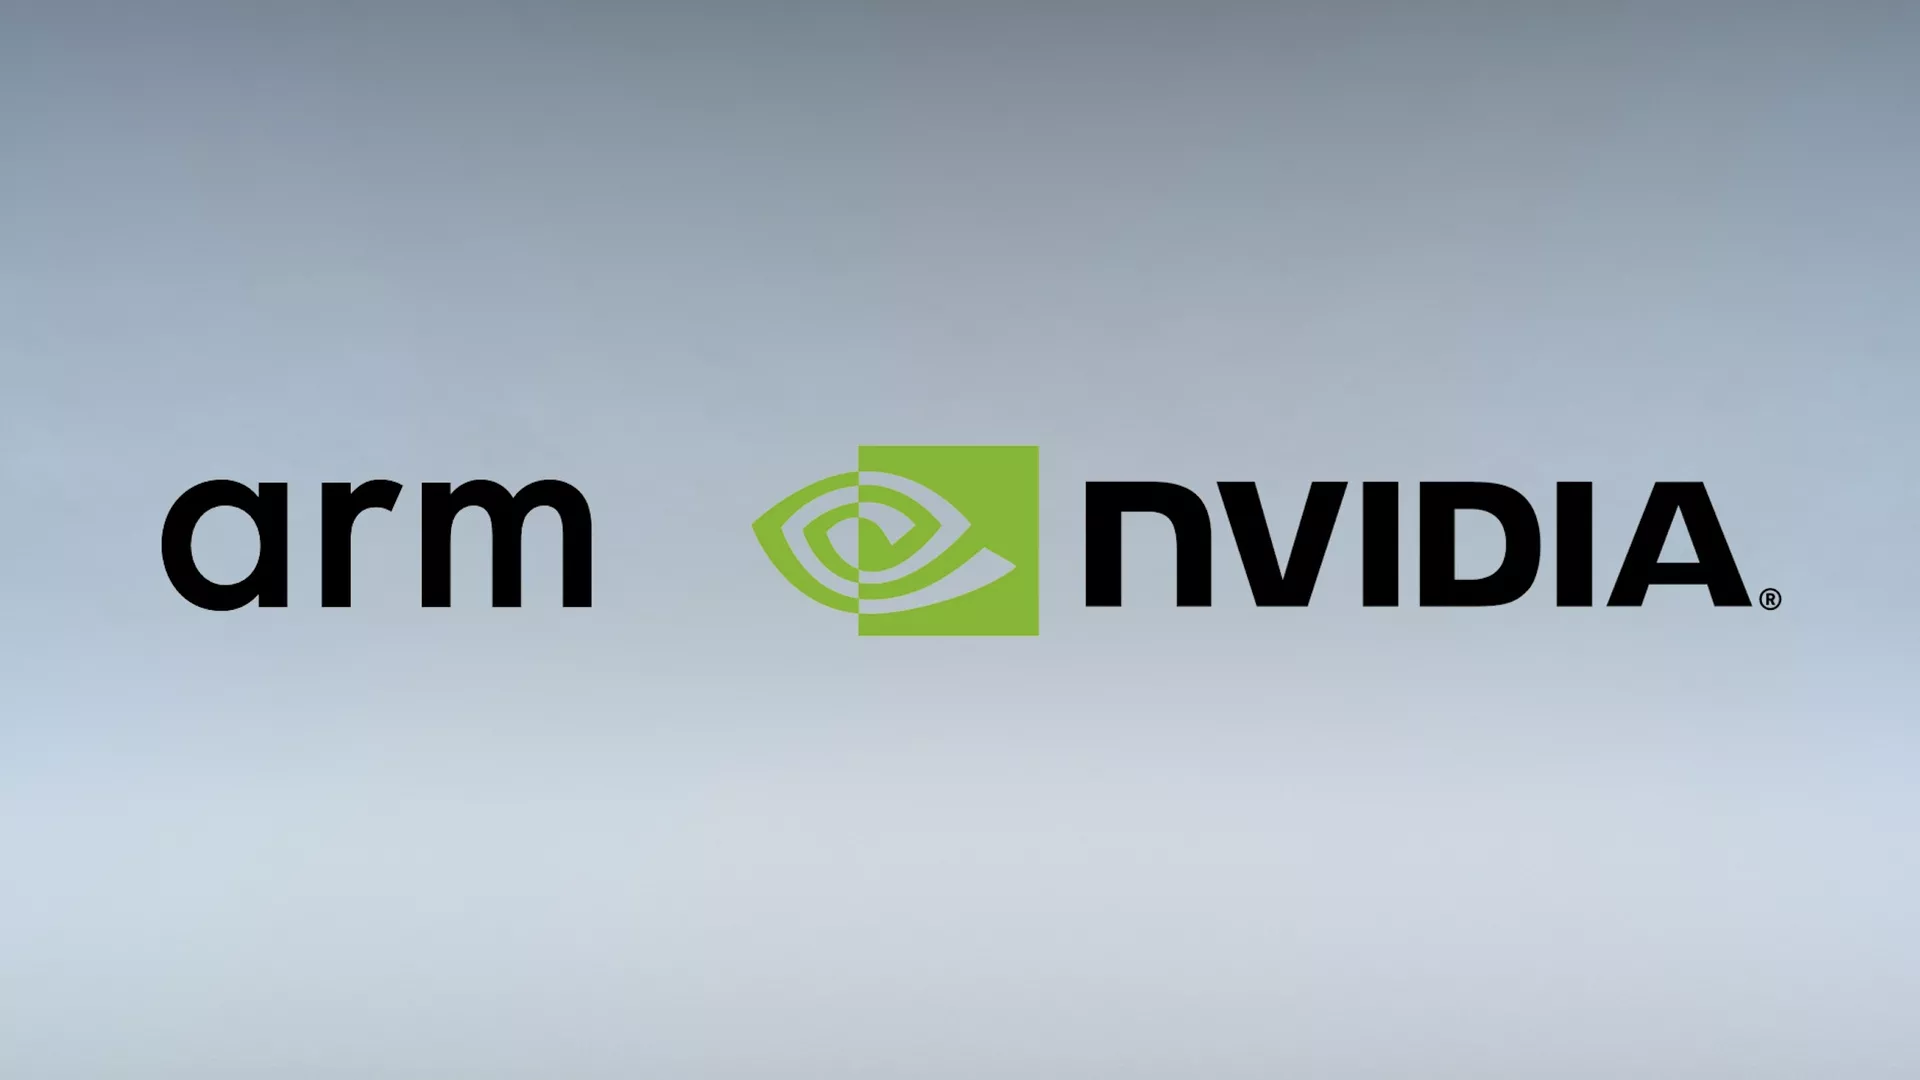 An illustration of the Arm and Nvidia logos